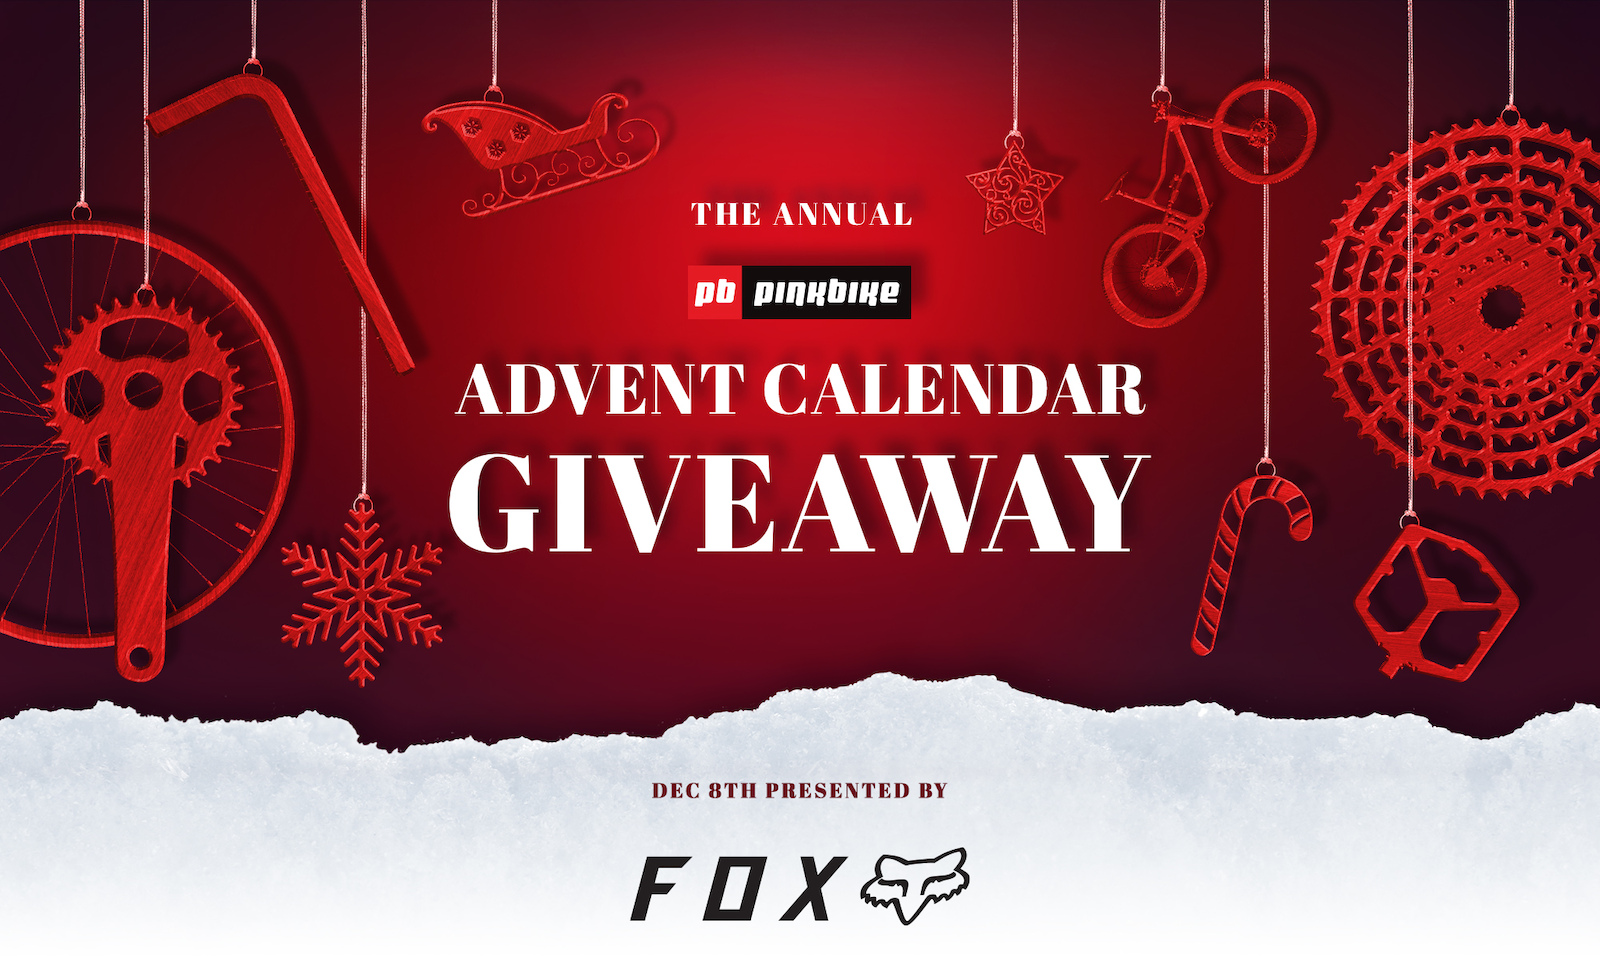 Enter to Win Fox Racing Kit Pinkbike's Advent Calendar Giveaway